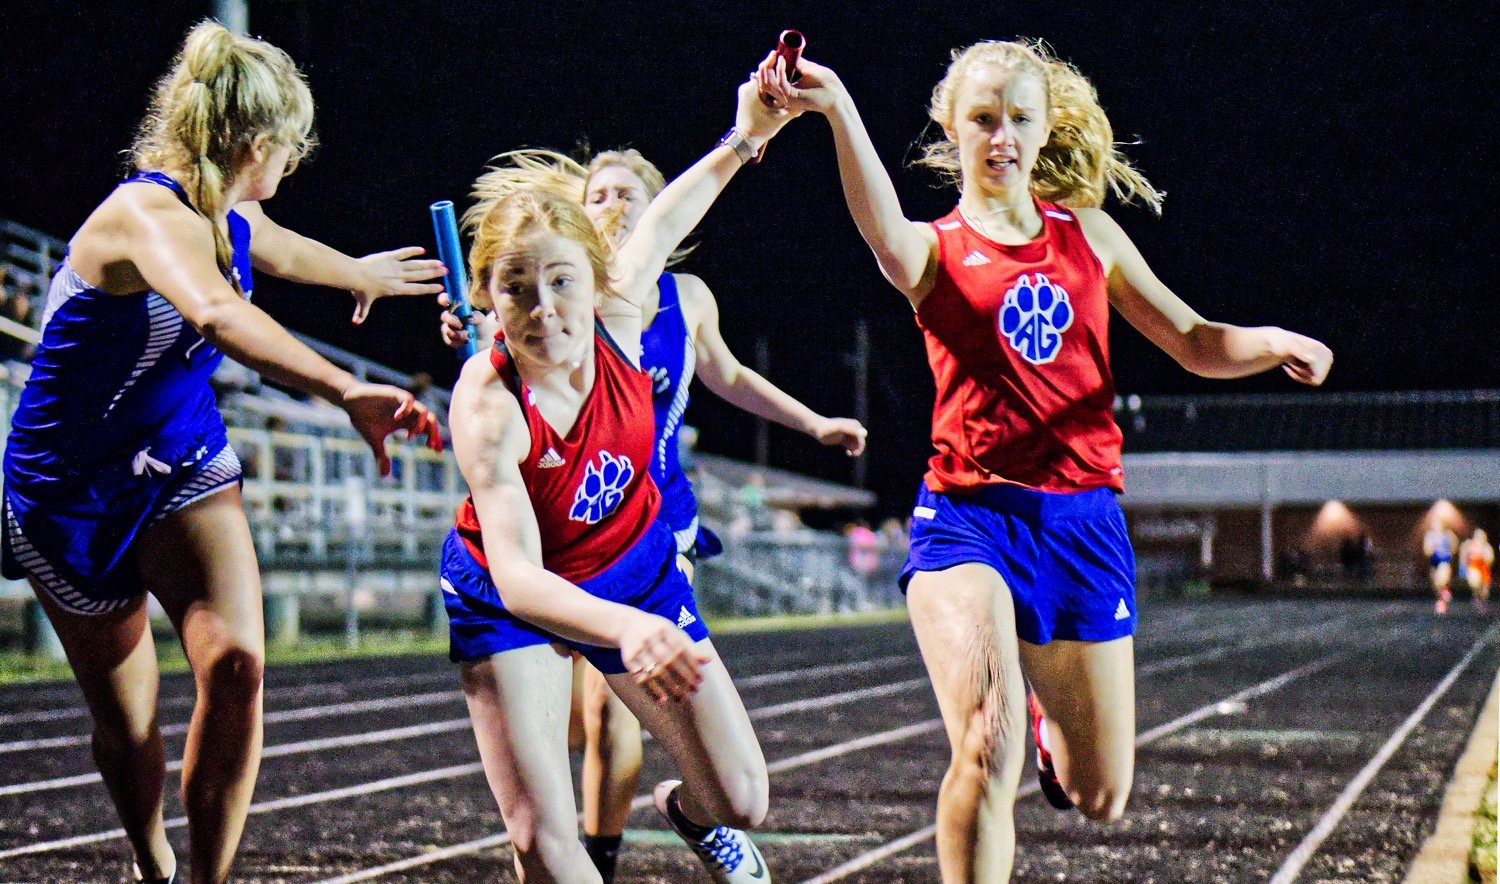 Bella Crawford hands off to Gracie Teel for the last leg of the 4x400m relay race, neck-and-neck with the Hawkins team. Teel closed out the win for the Alba-Golden team which was led off by Cacie Lennon and Kamrin Wright. [just a start - finish the album here]